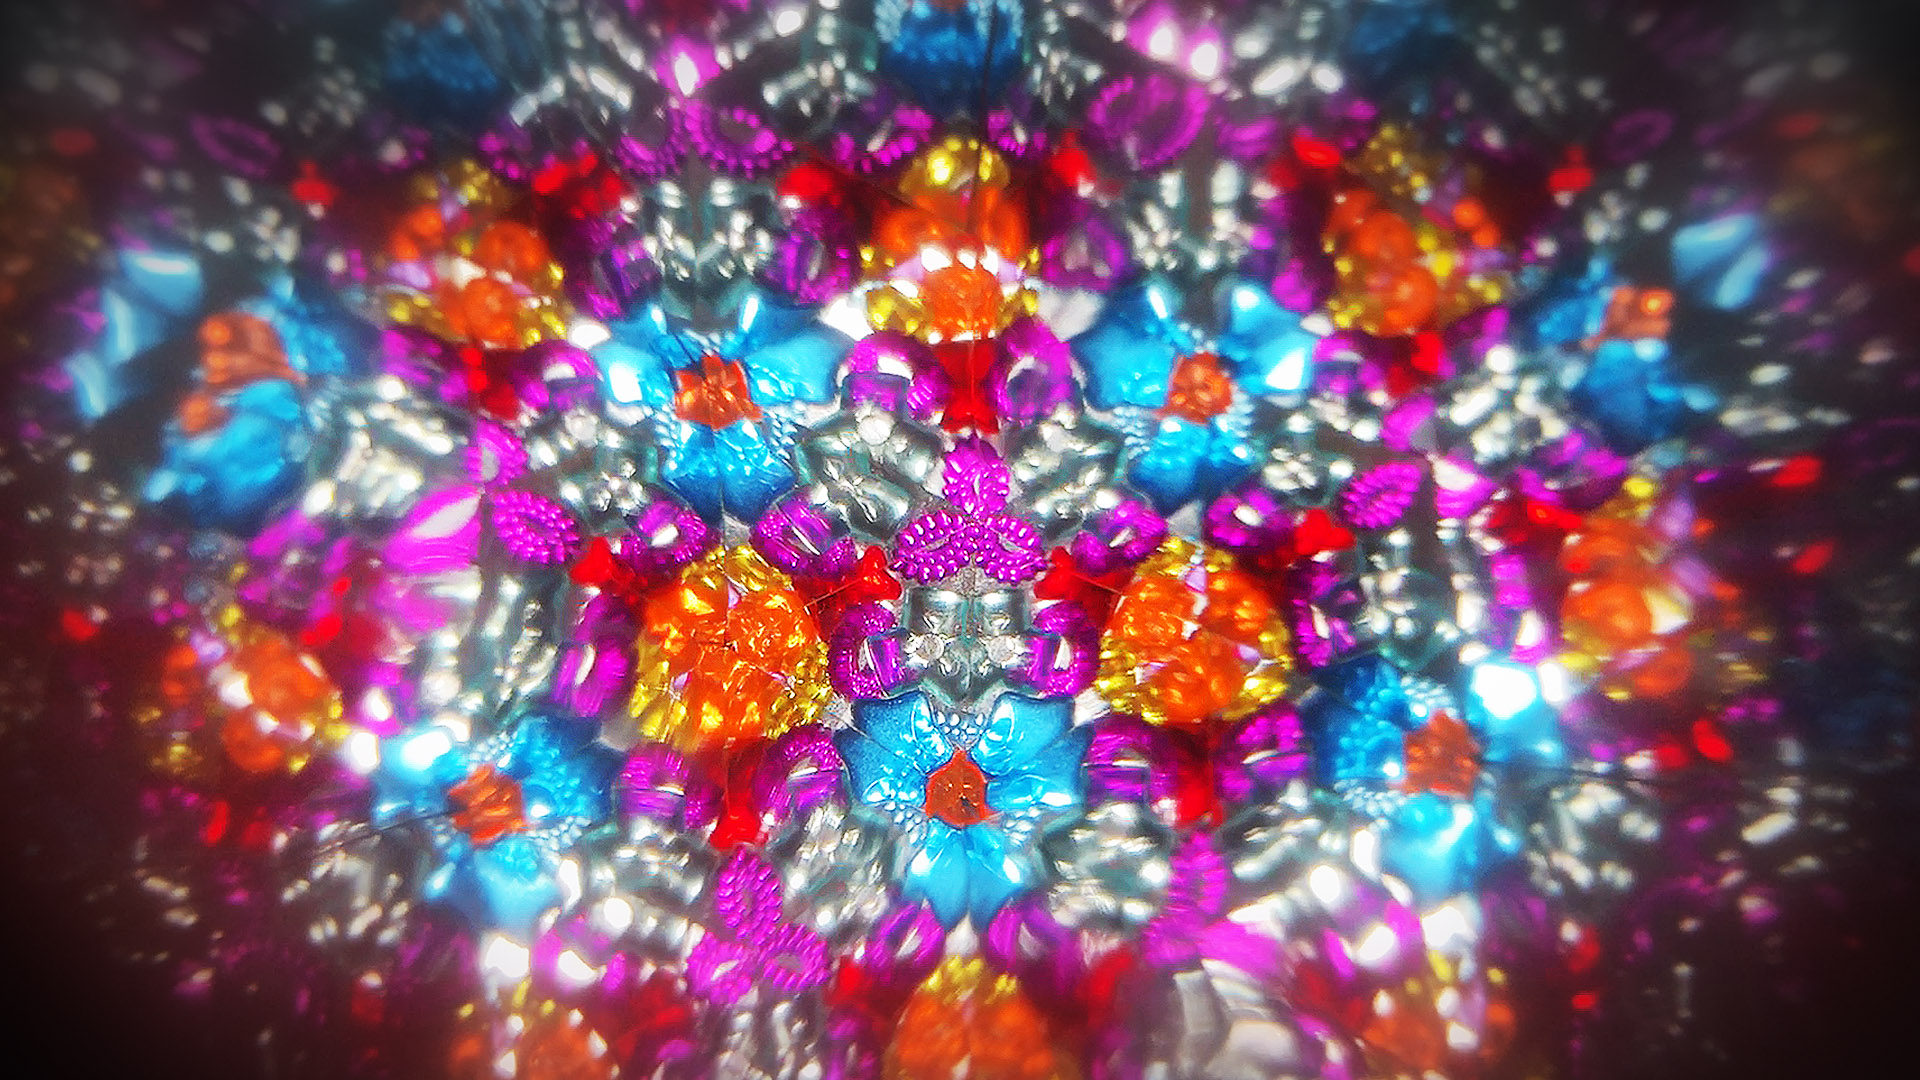 Still image of the view from a kaleidoscope